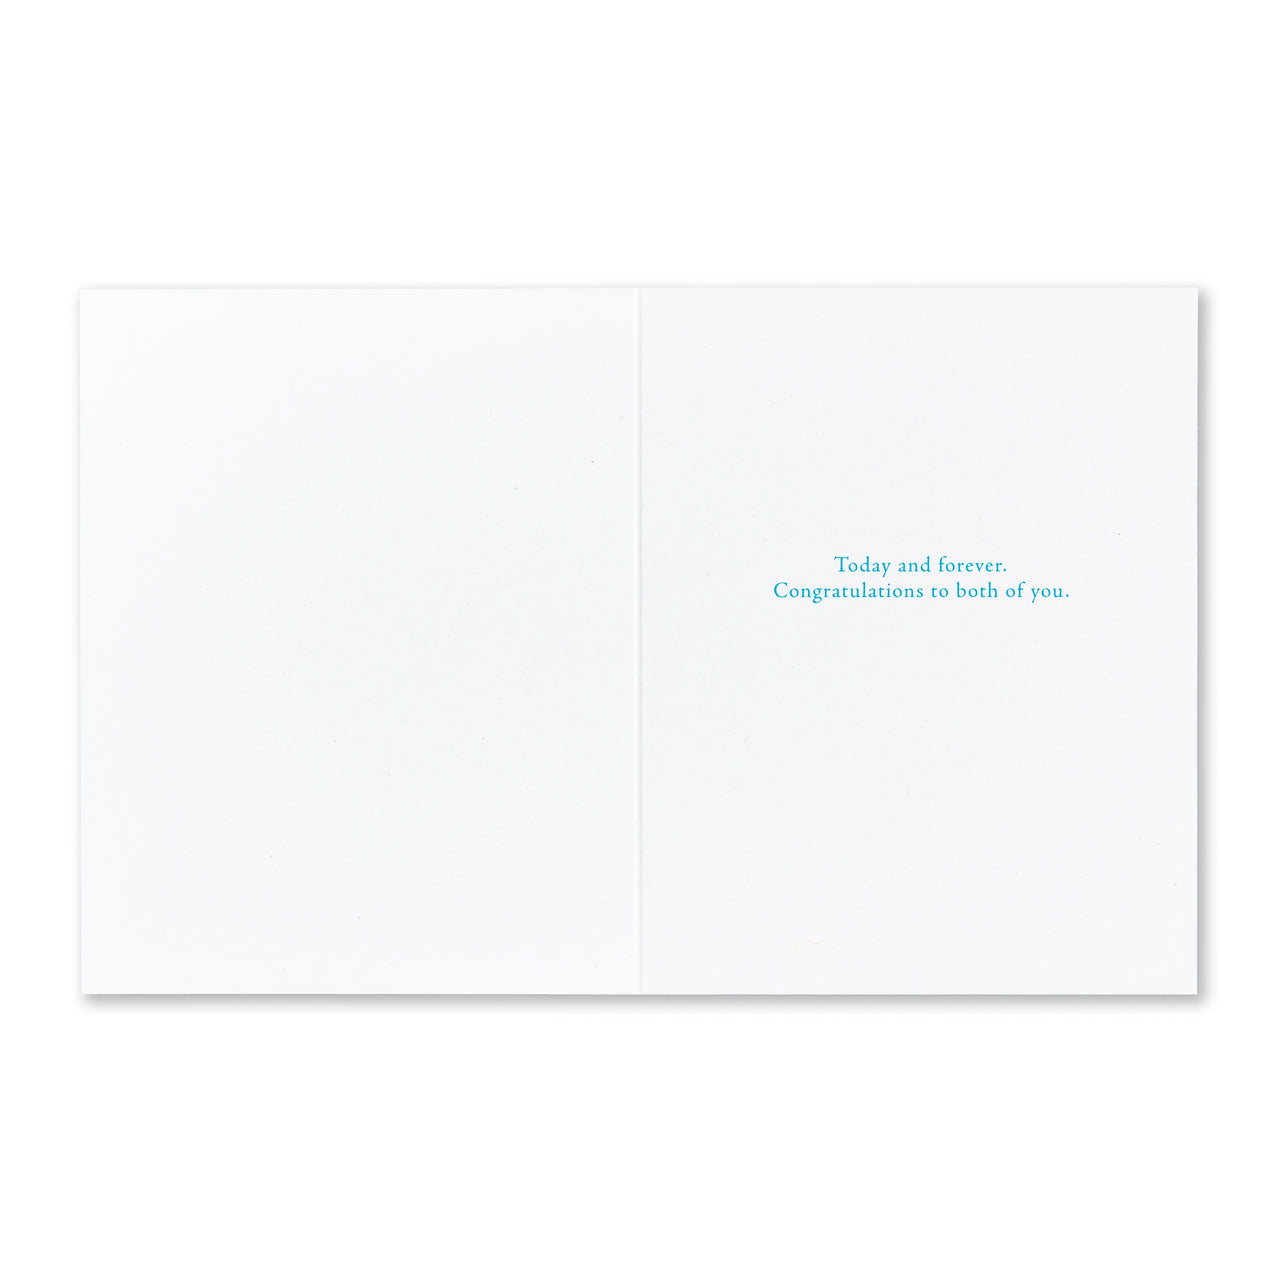 Positively Green Greeting Card - Wedding -  "Take Time to Share Everything..." - Grace Duffield Goodwin - Mellow Monkey